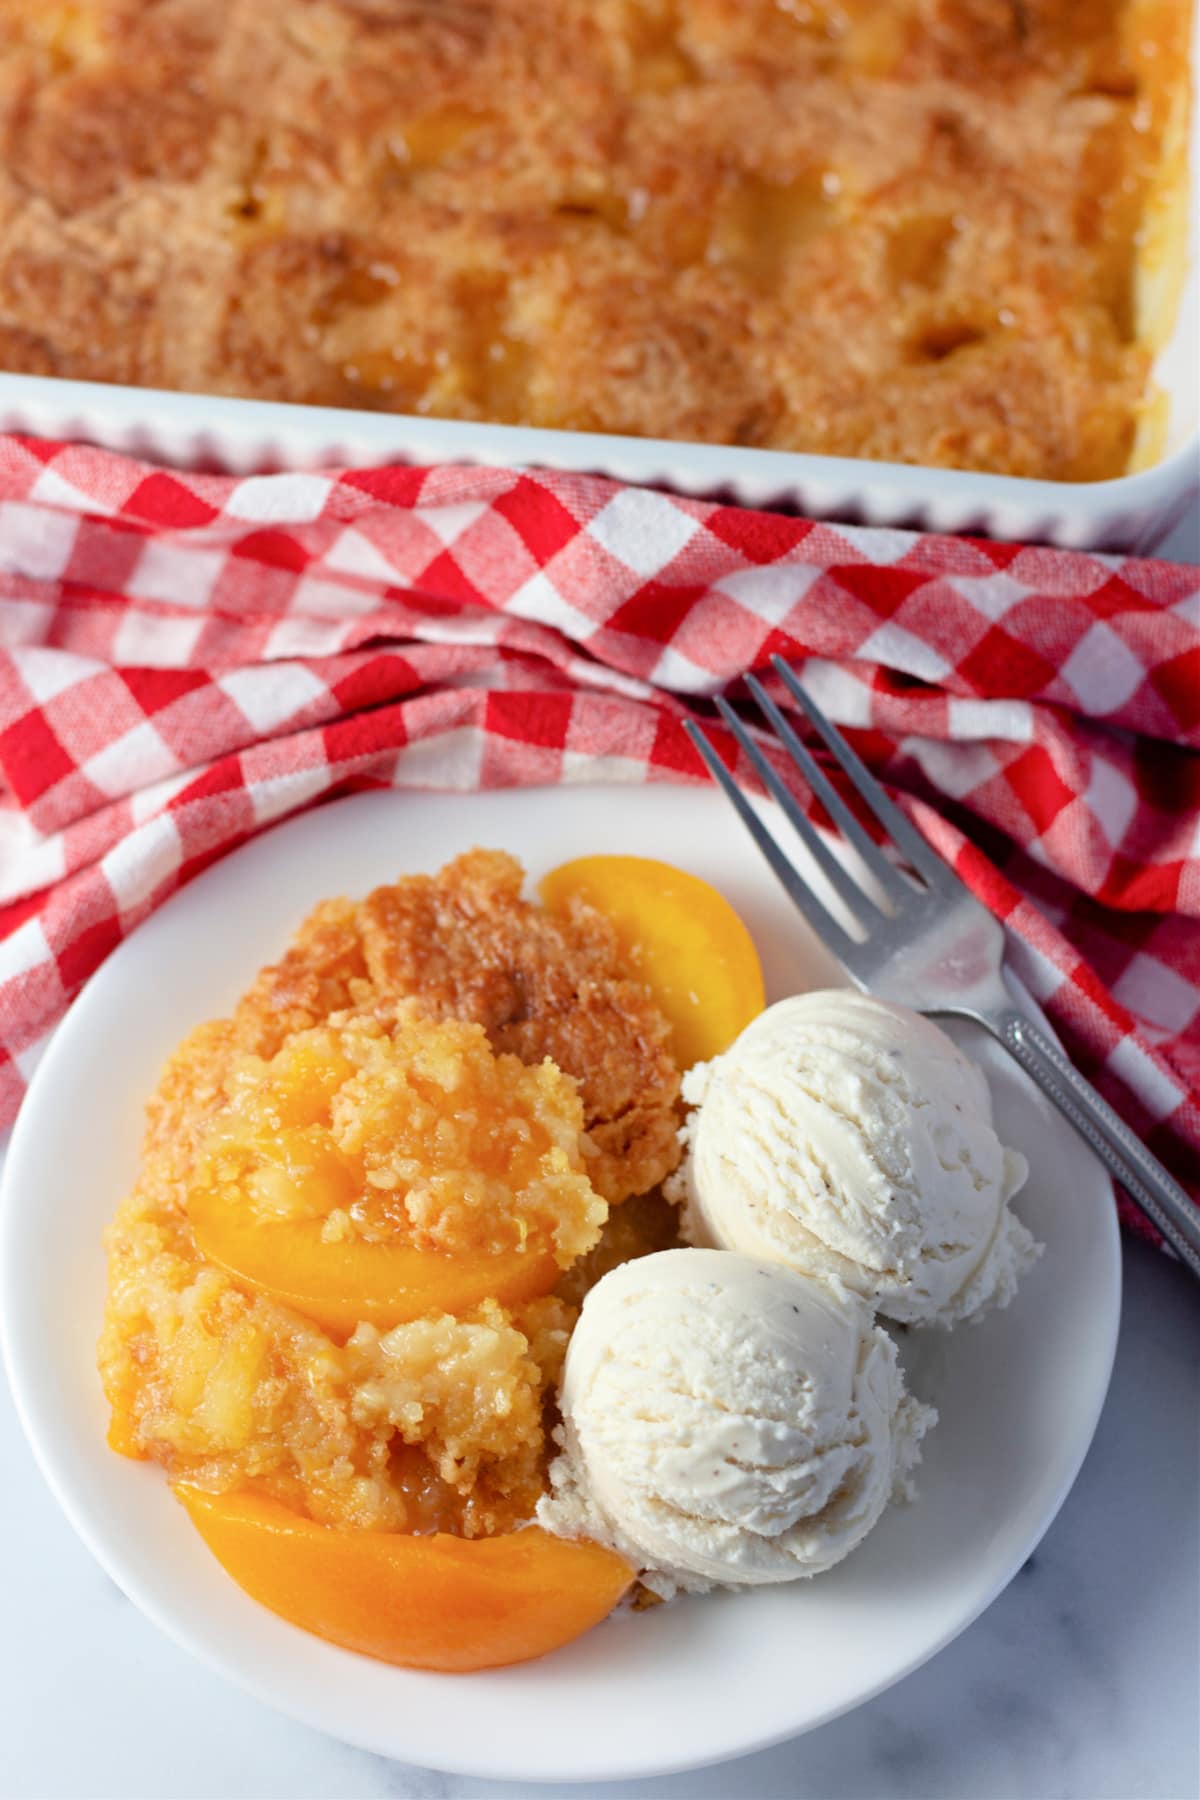 Top view of Peach Dump Cake with ice cream